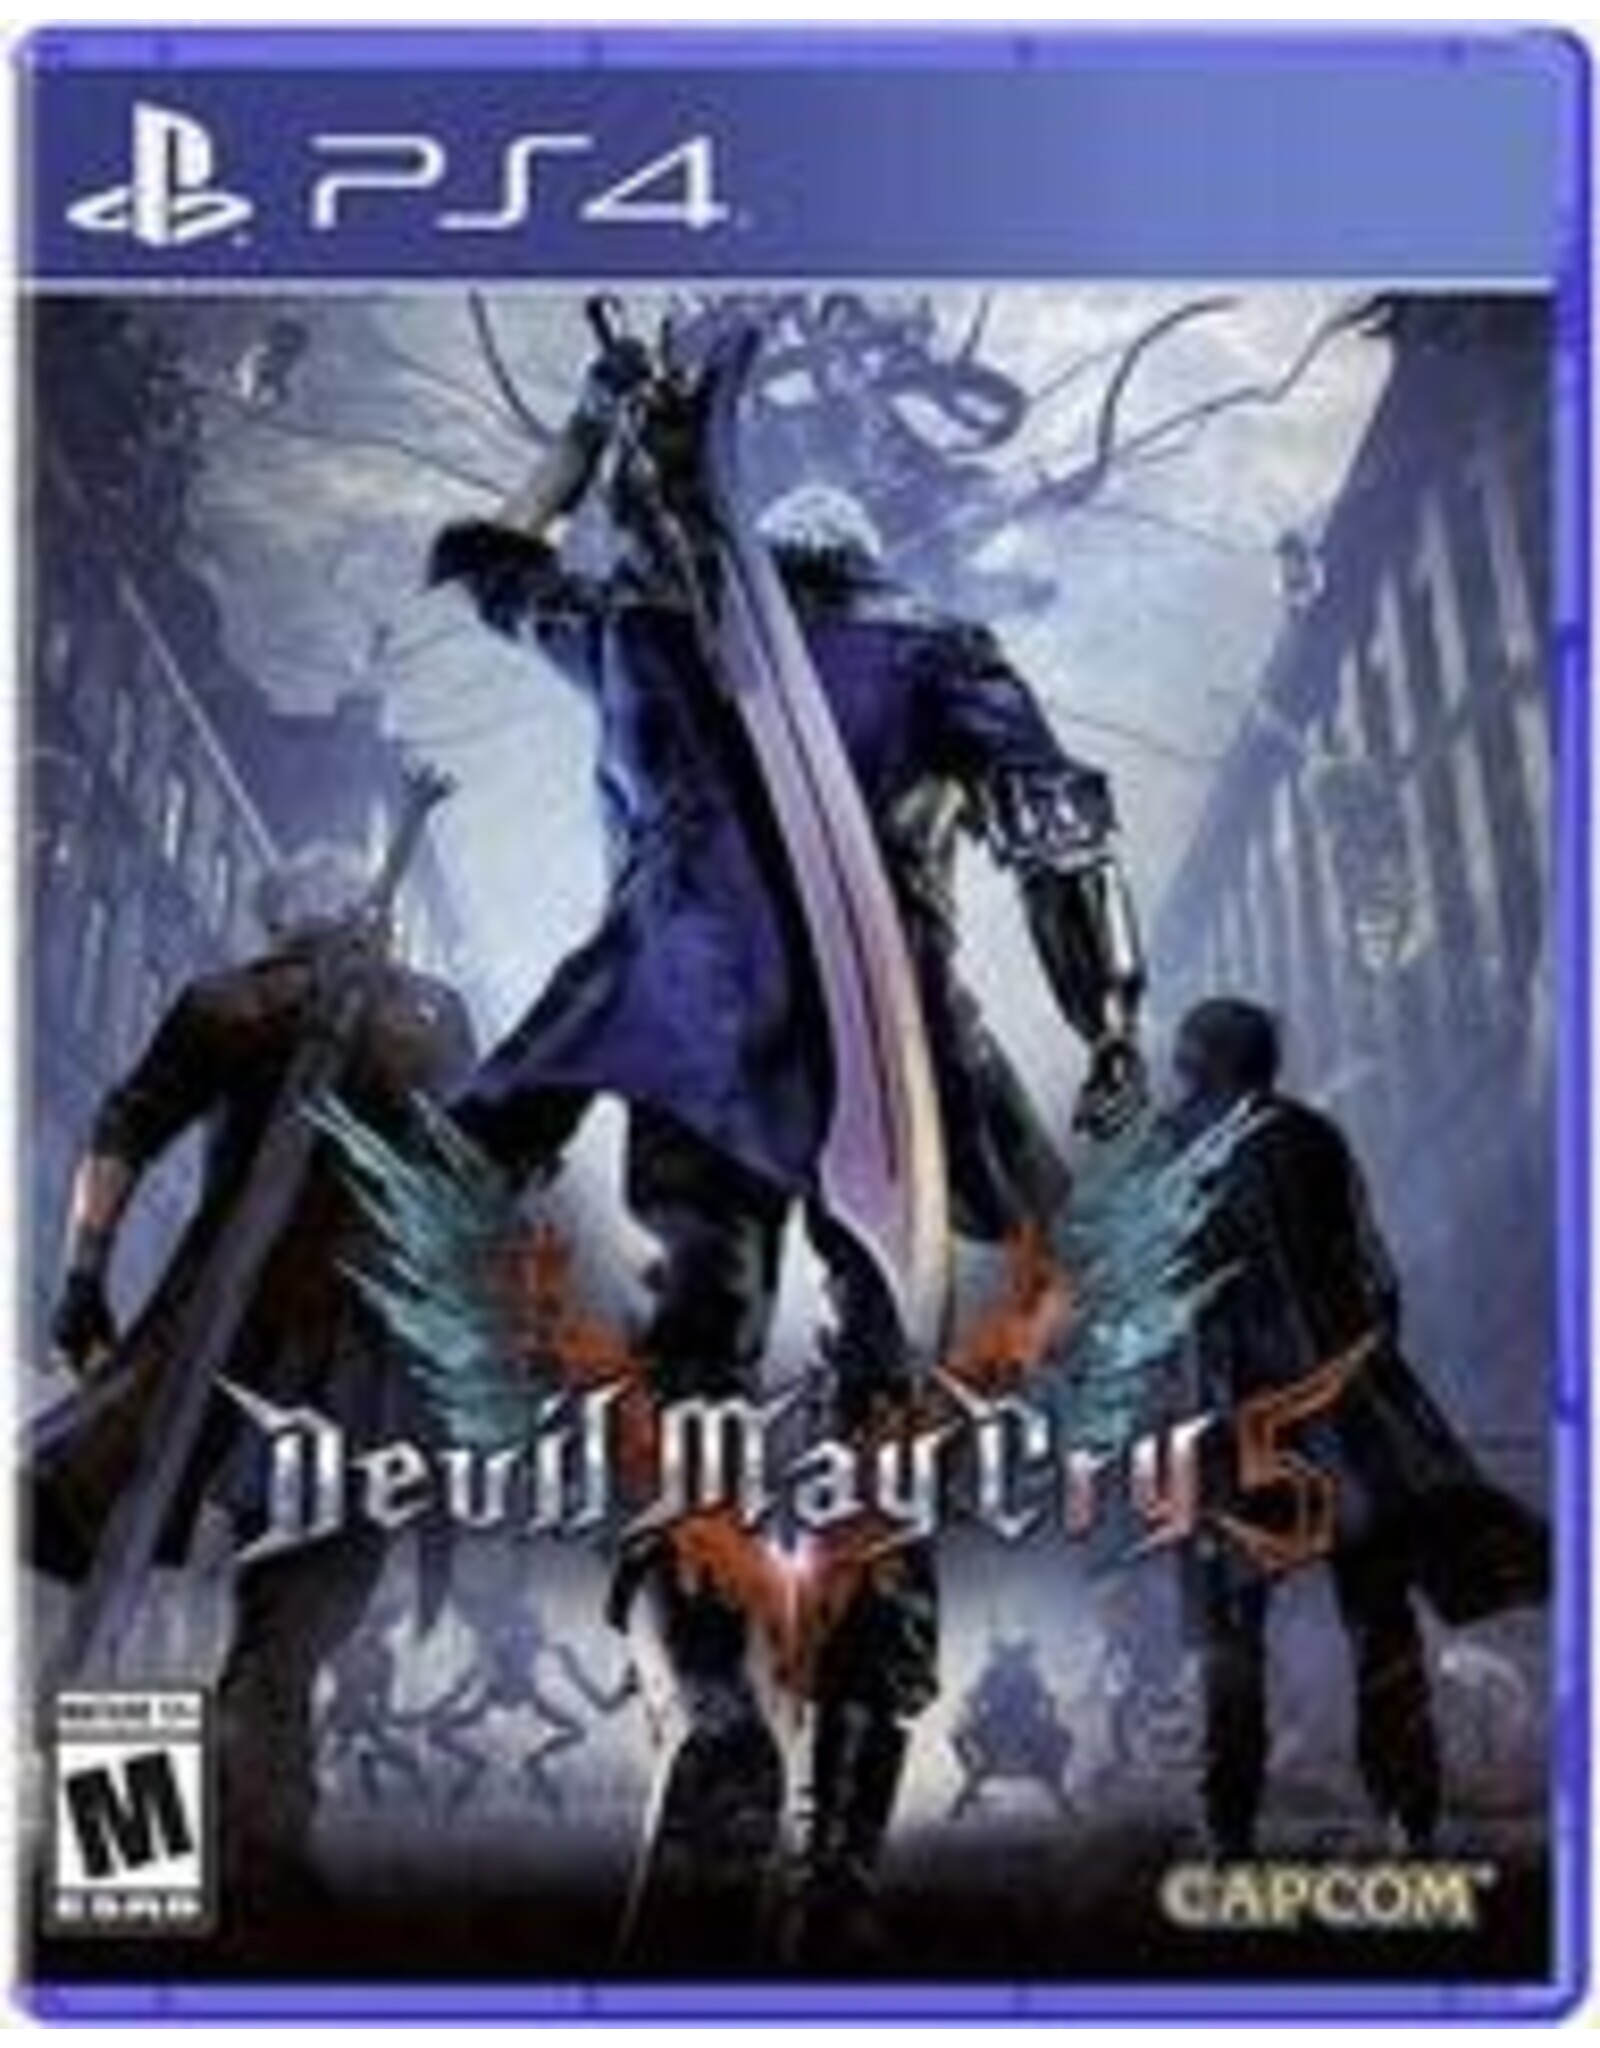 Playstation 4 Devil May Cry 5 (Used)